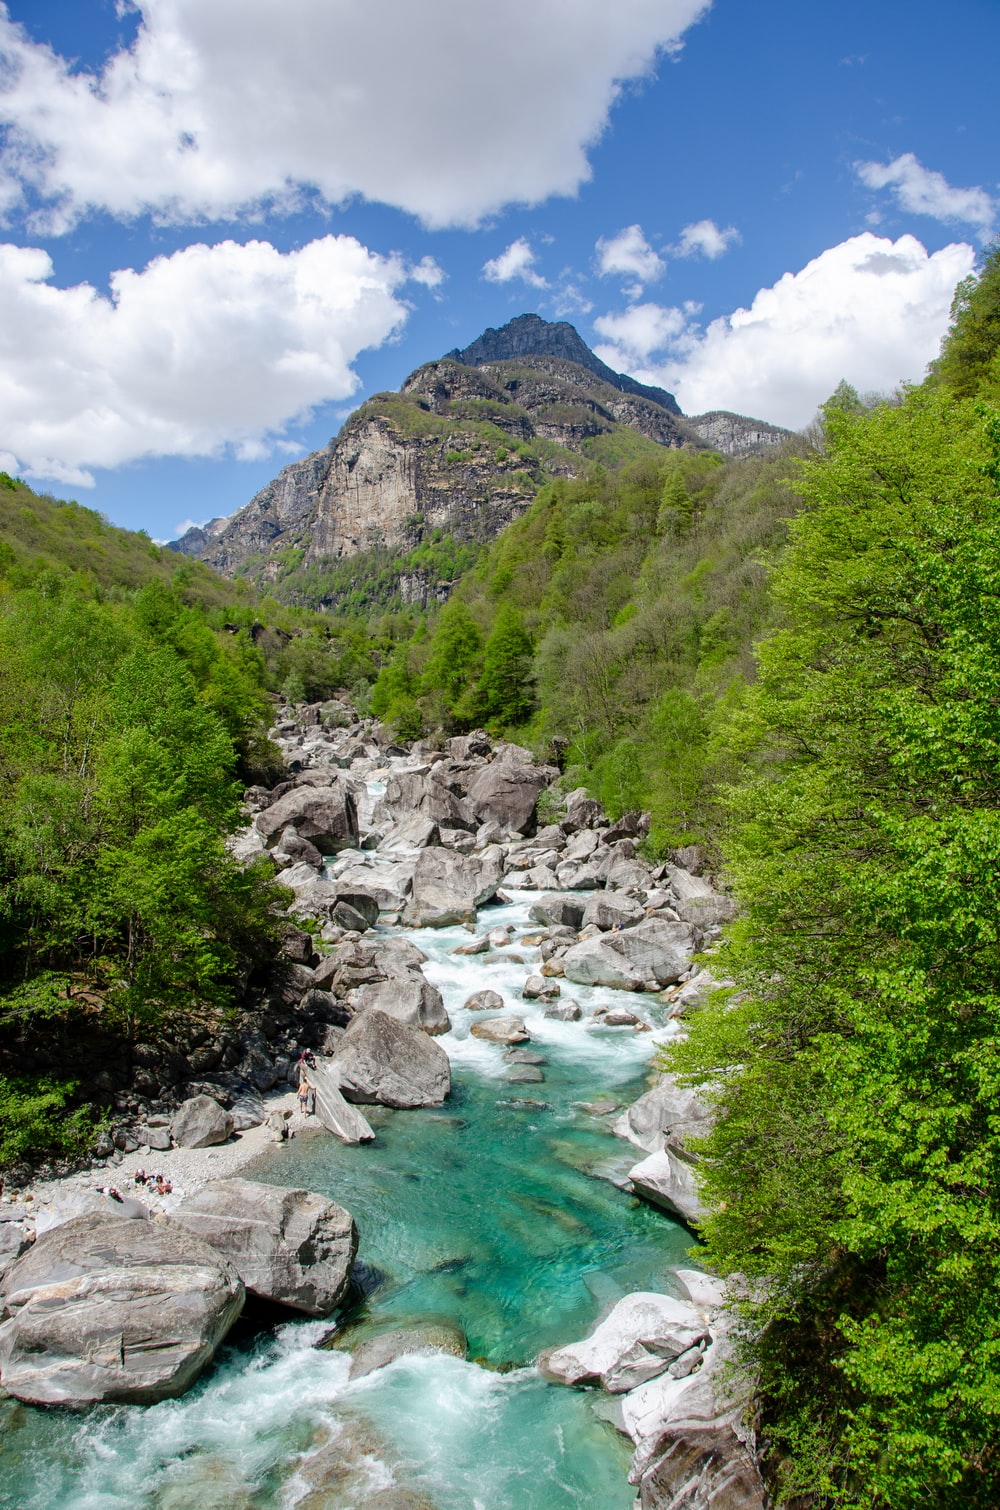 Mountain River Picture. Download Free Image